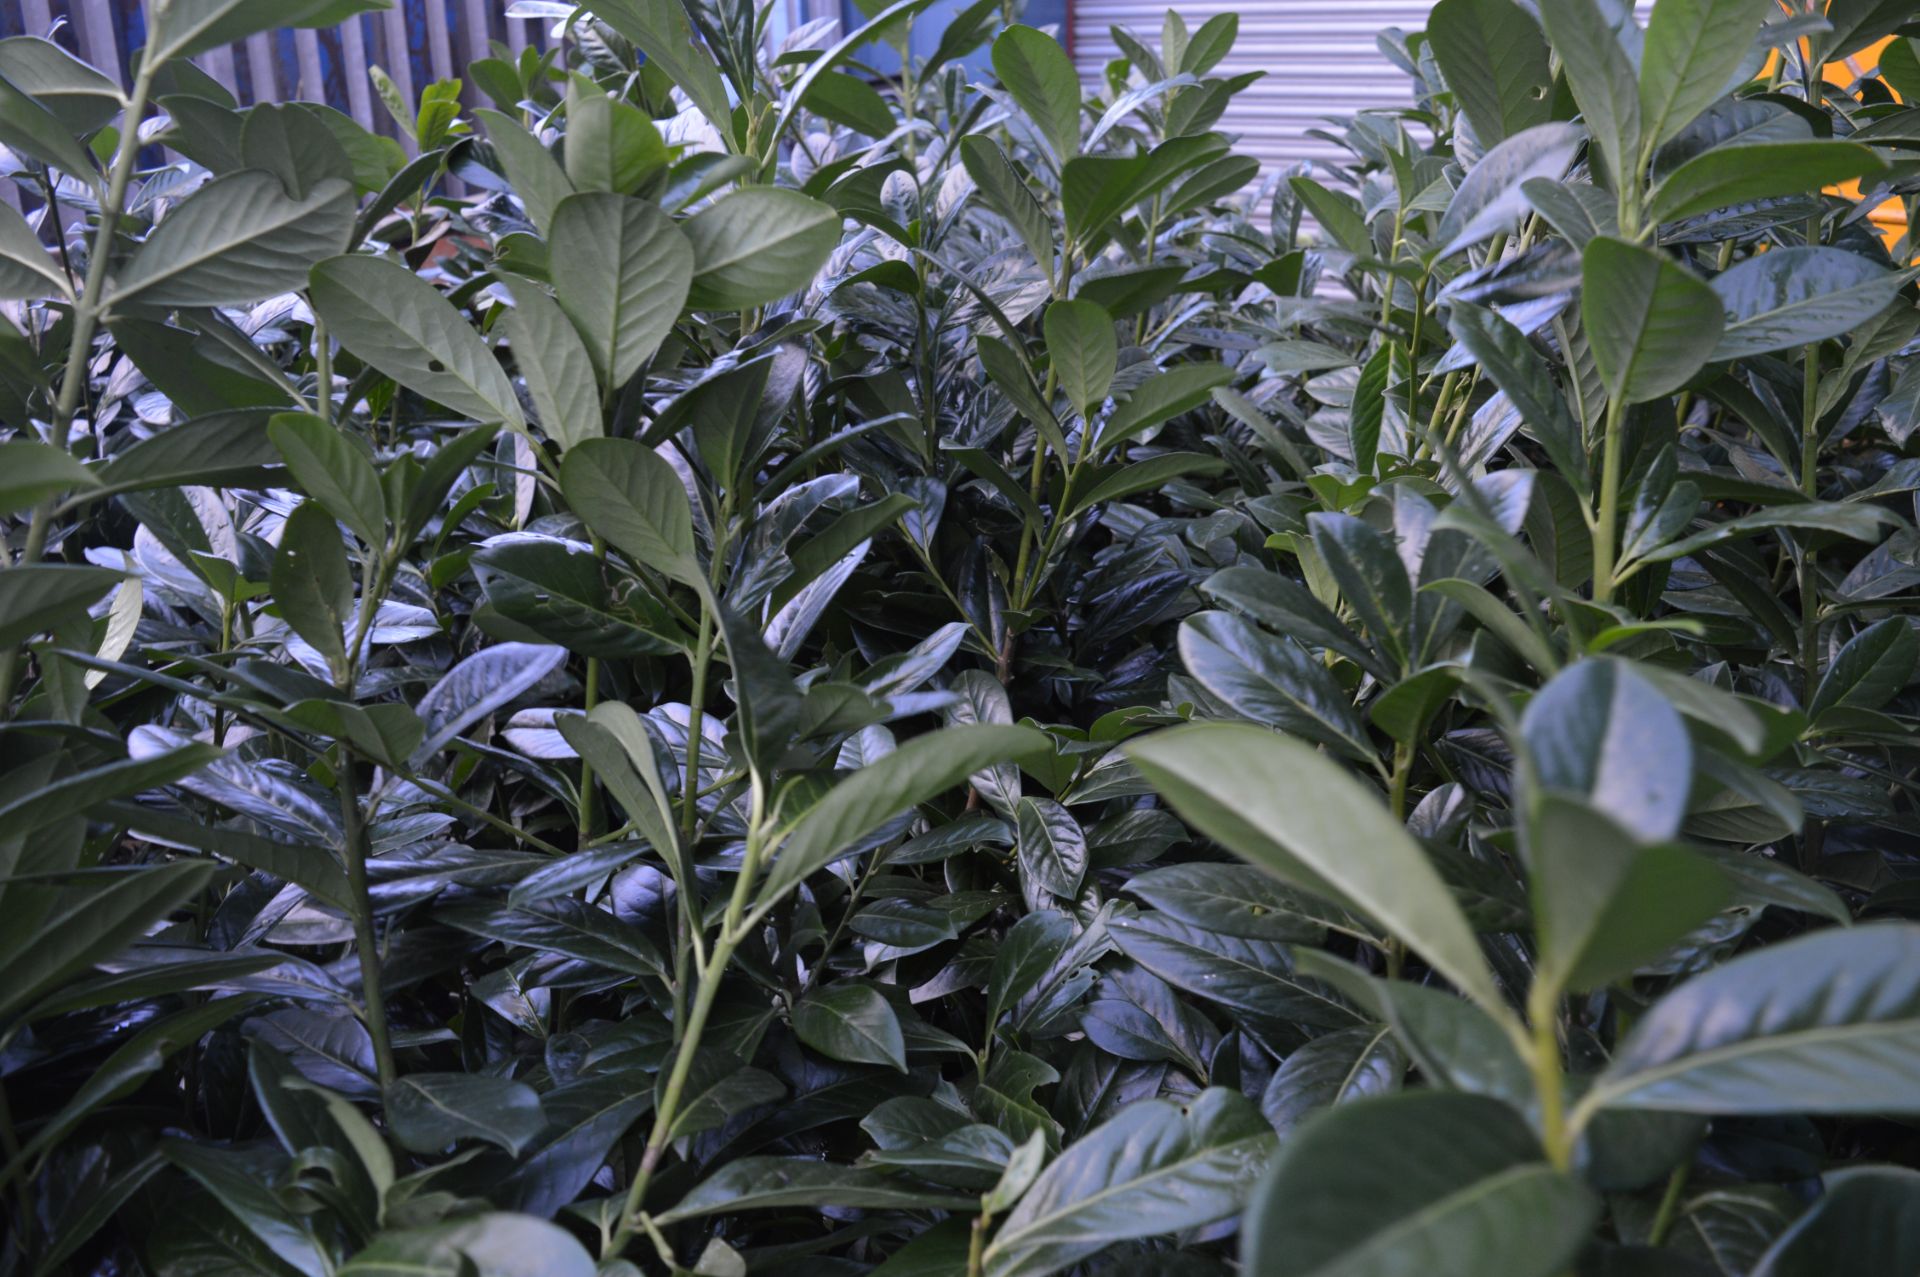 10 x Laurel Potted Garden Plants - Approx 4 to 5 Feet Tall - CL057 - Location: Welwyn, - Image 3 of 5